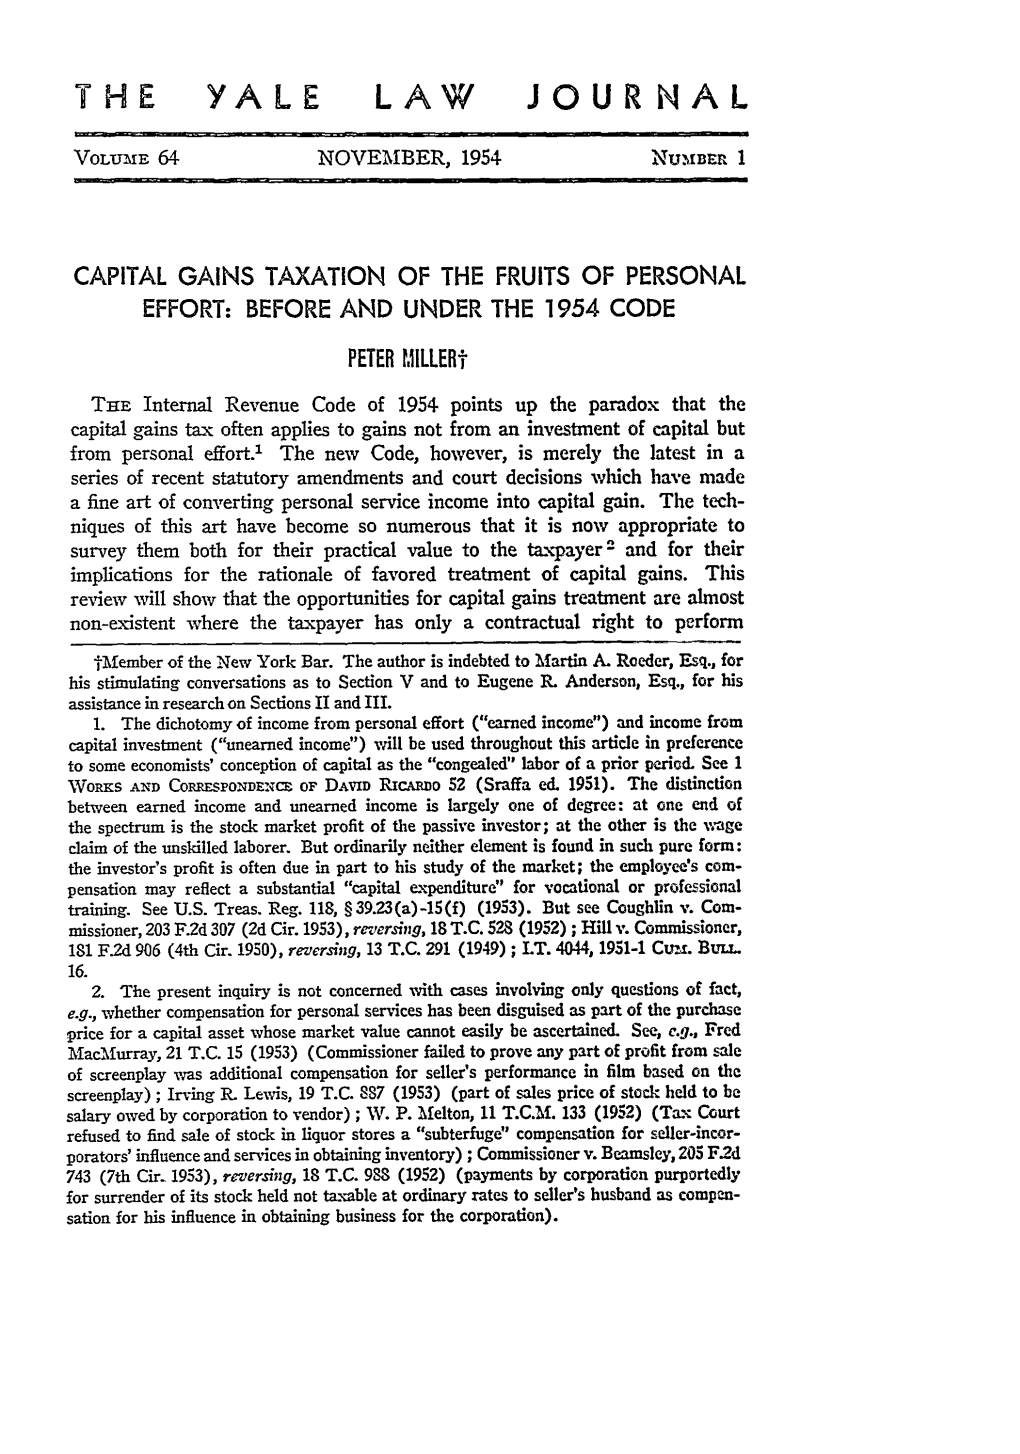 Capital Gains Taxation of the Fruits of Personal Effort: Before and Under the 1954 Code Peter Miller-"